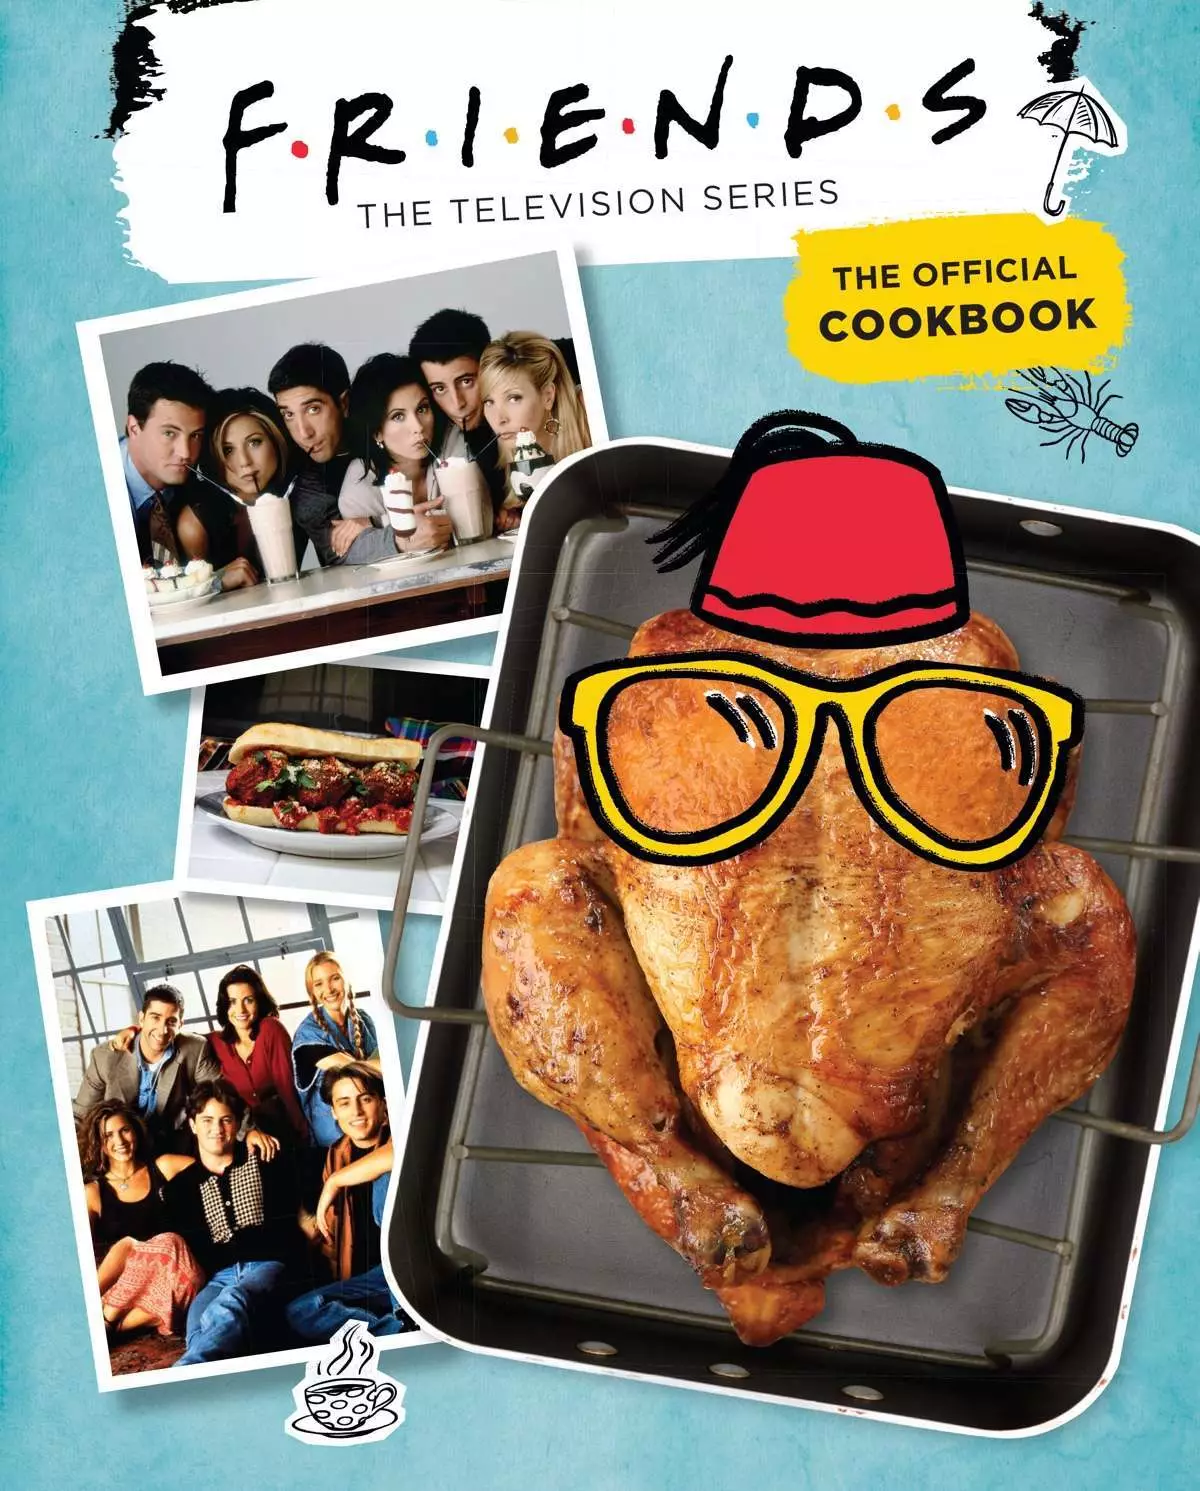 The official 'Friends' cookbook will be published 22nd September (